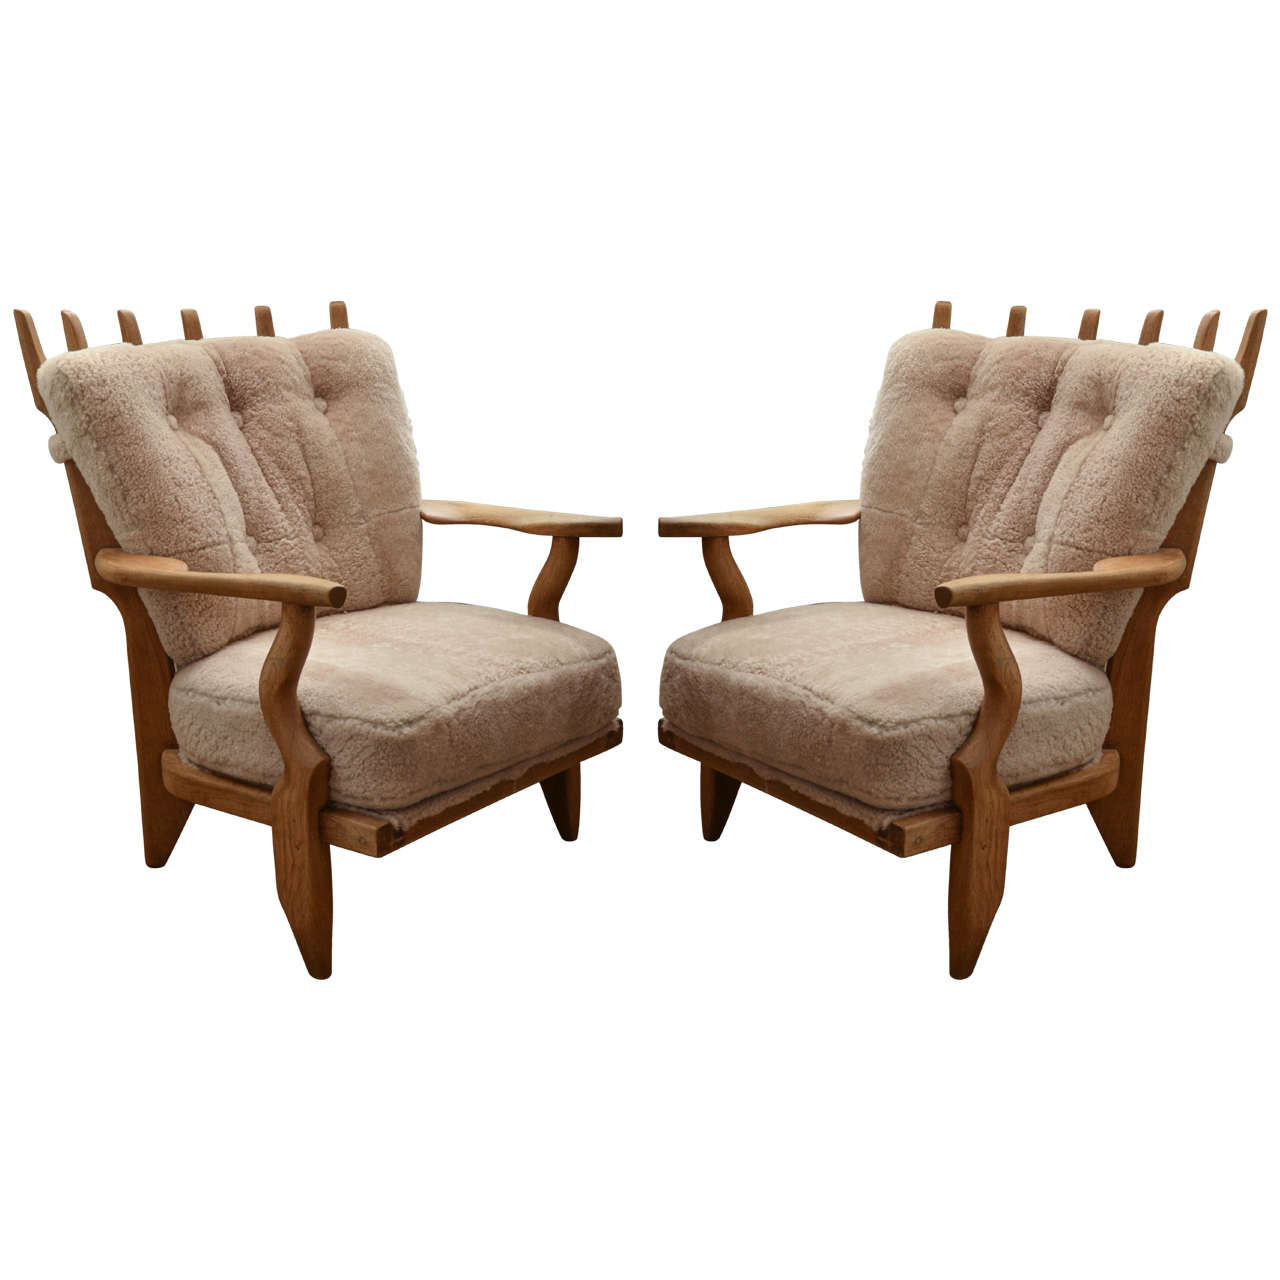 Mid-Century Guillerme et Chambron Oak Lounge Chairs in Shearling